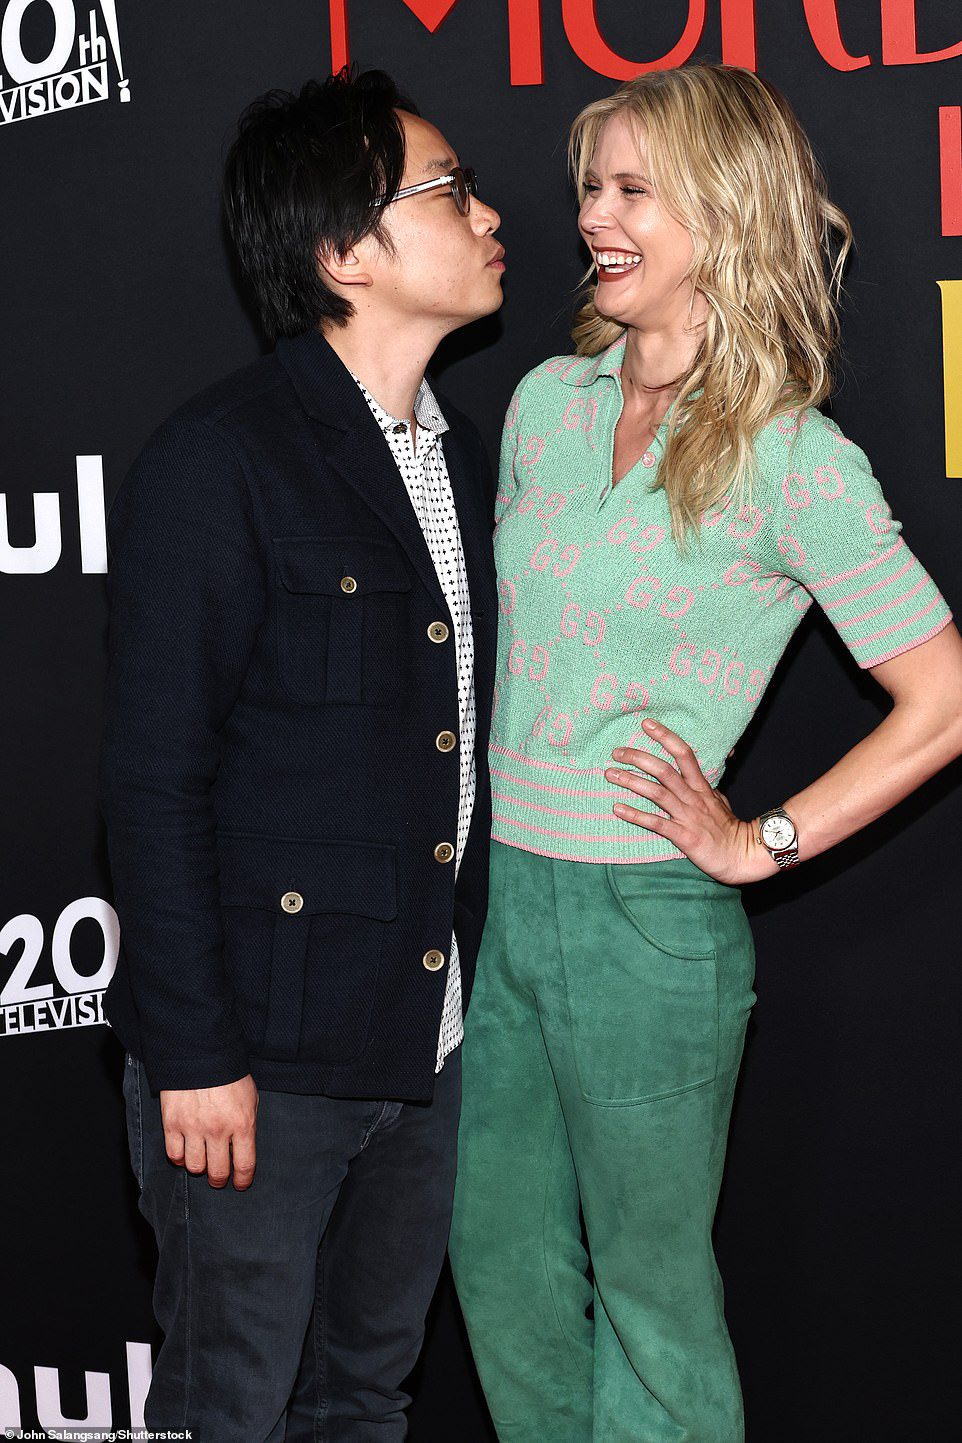 Laughs: Jimmy O. Yang and girlfriend Bri Kimmel share a laugh at the 'Only Murders in the Building' premiere